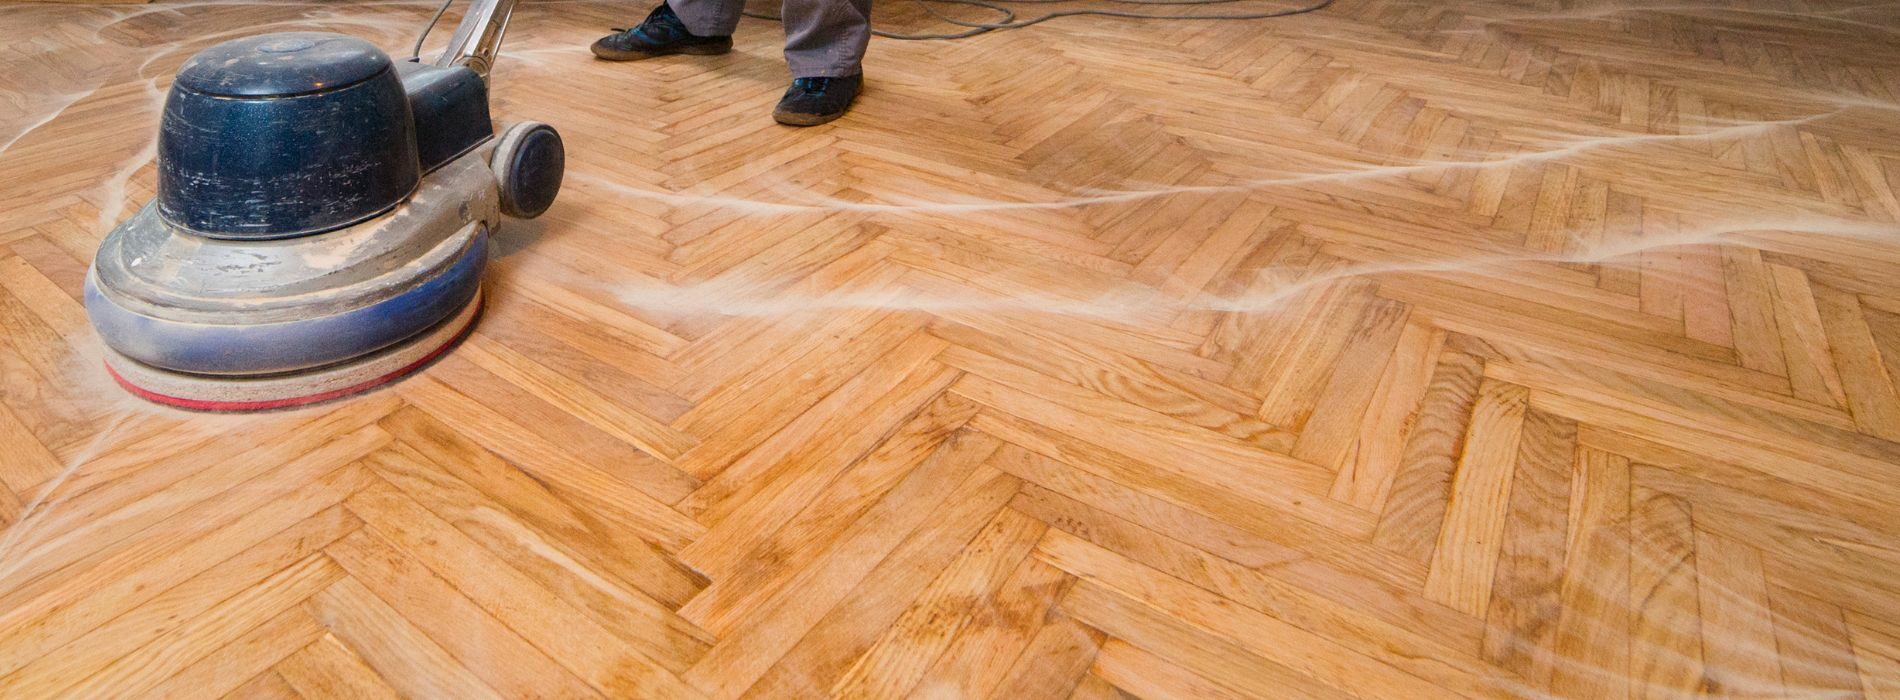 A skilled professional wearing protective gear operates a high-powered 540v polishing machine with a 750mm driving plate and a 60grit screen to meticulously restore the luster of a beautiful parquet floor. The expertly controlled machine effortlessly glides over the wooden surface, revealing a flawless finish. The intricate patterns of the parquet floor shine under the careful attention, reflecting light and showcasing its natural beauty.